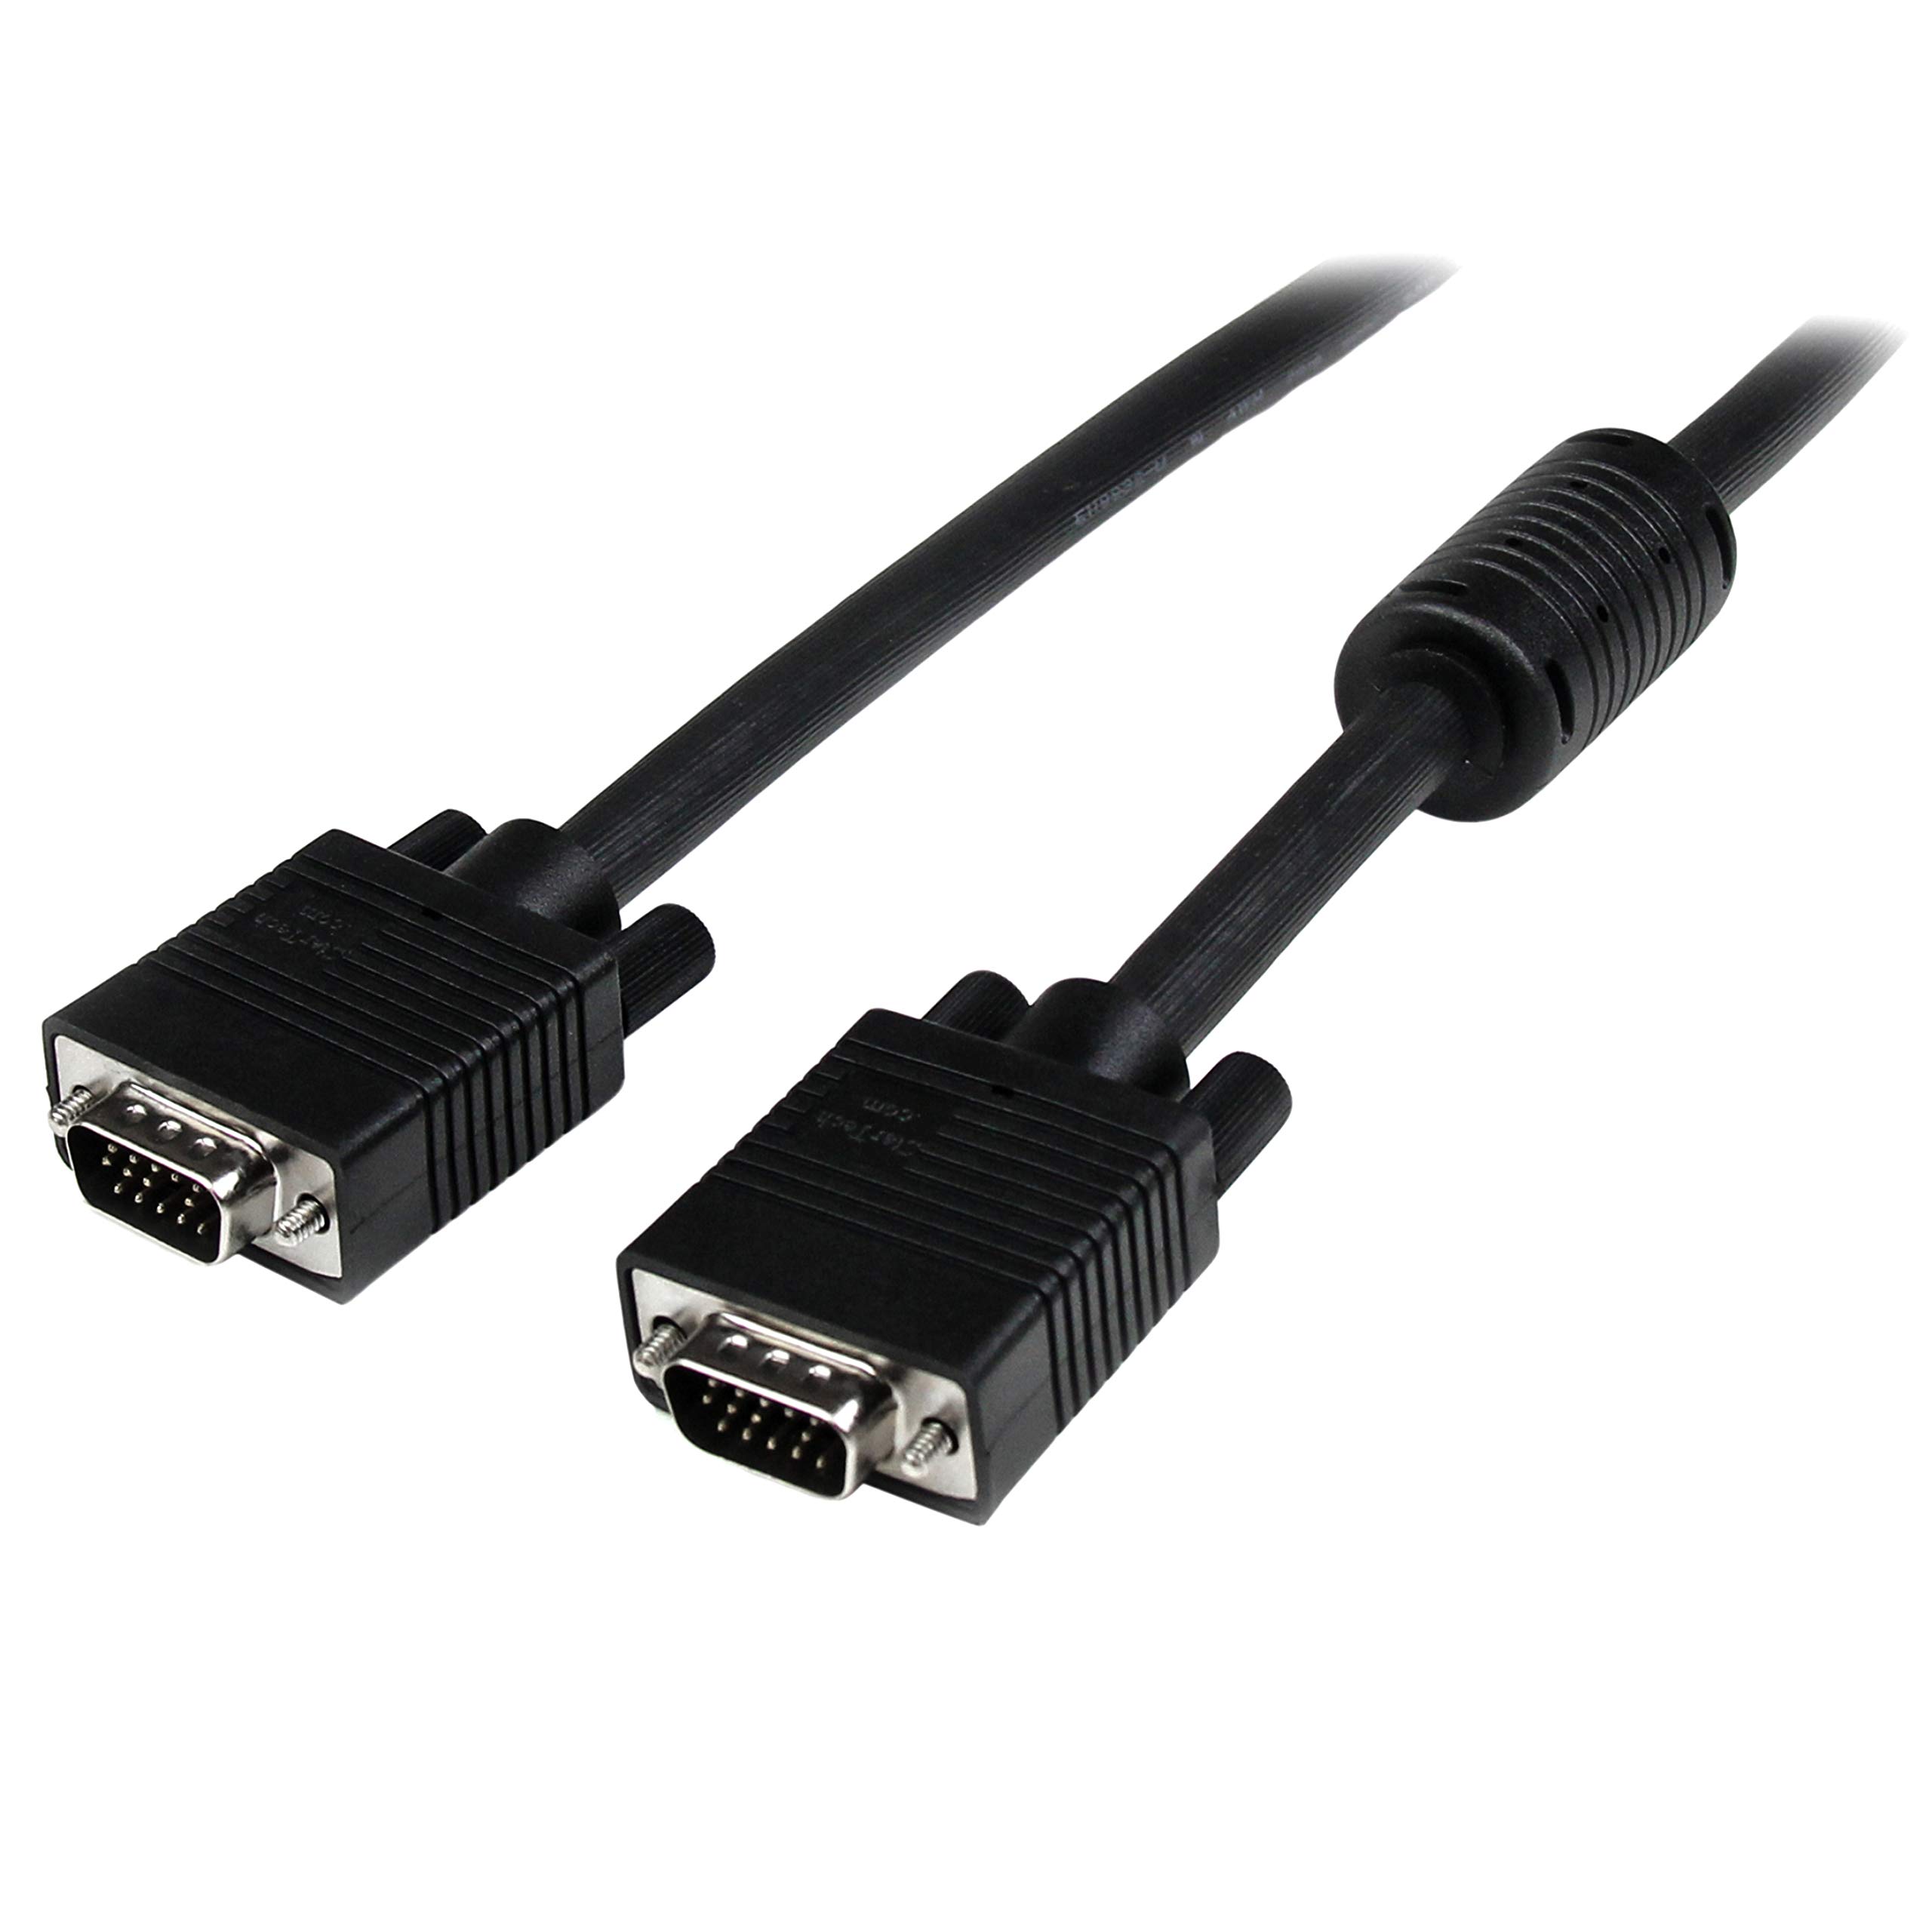 StarTech.com 15m High Resolution VgA cable - HD15 to HD15 - MM coaxial VgA Video cable (MXTMMHQ15M)